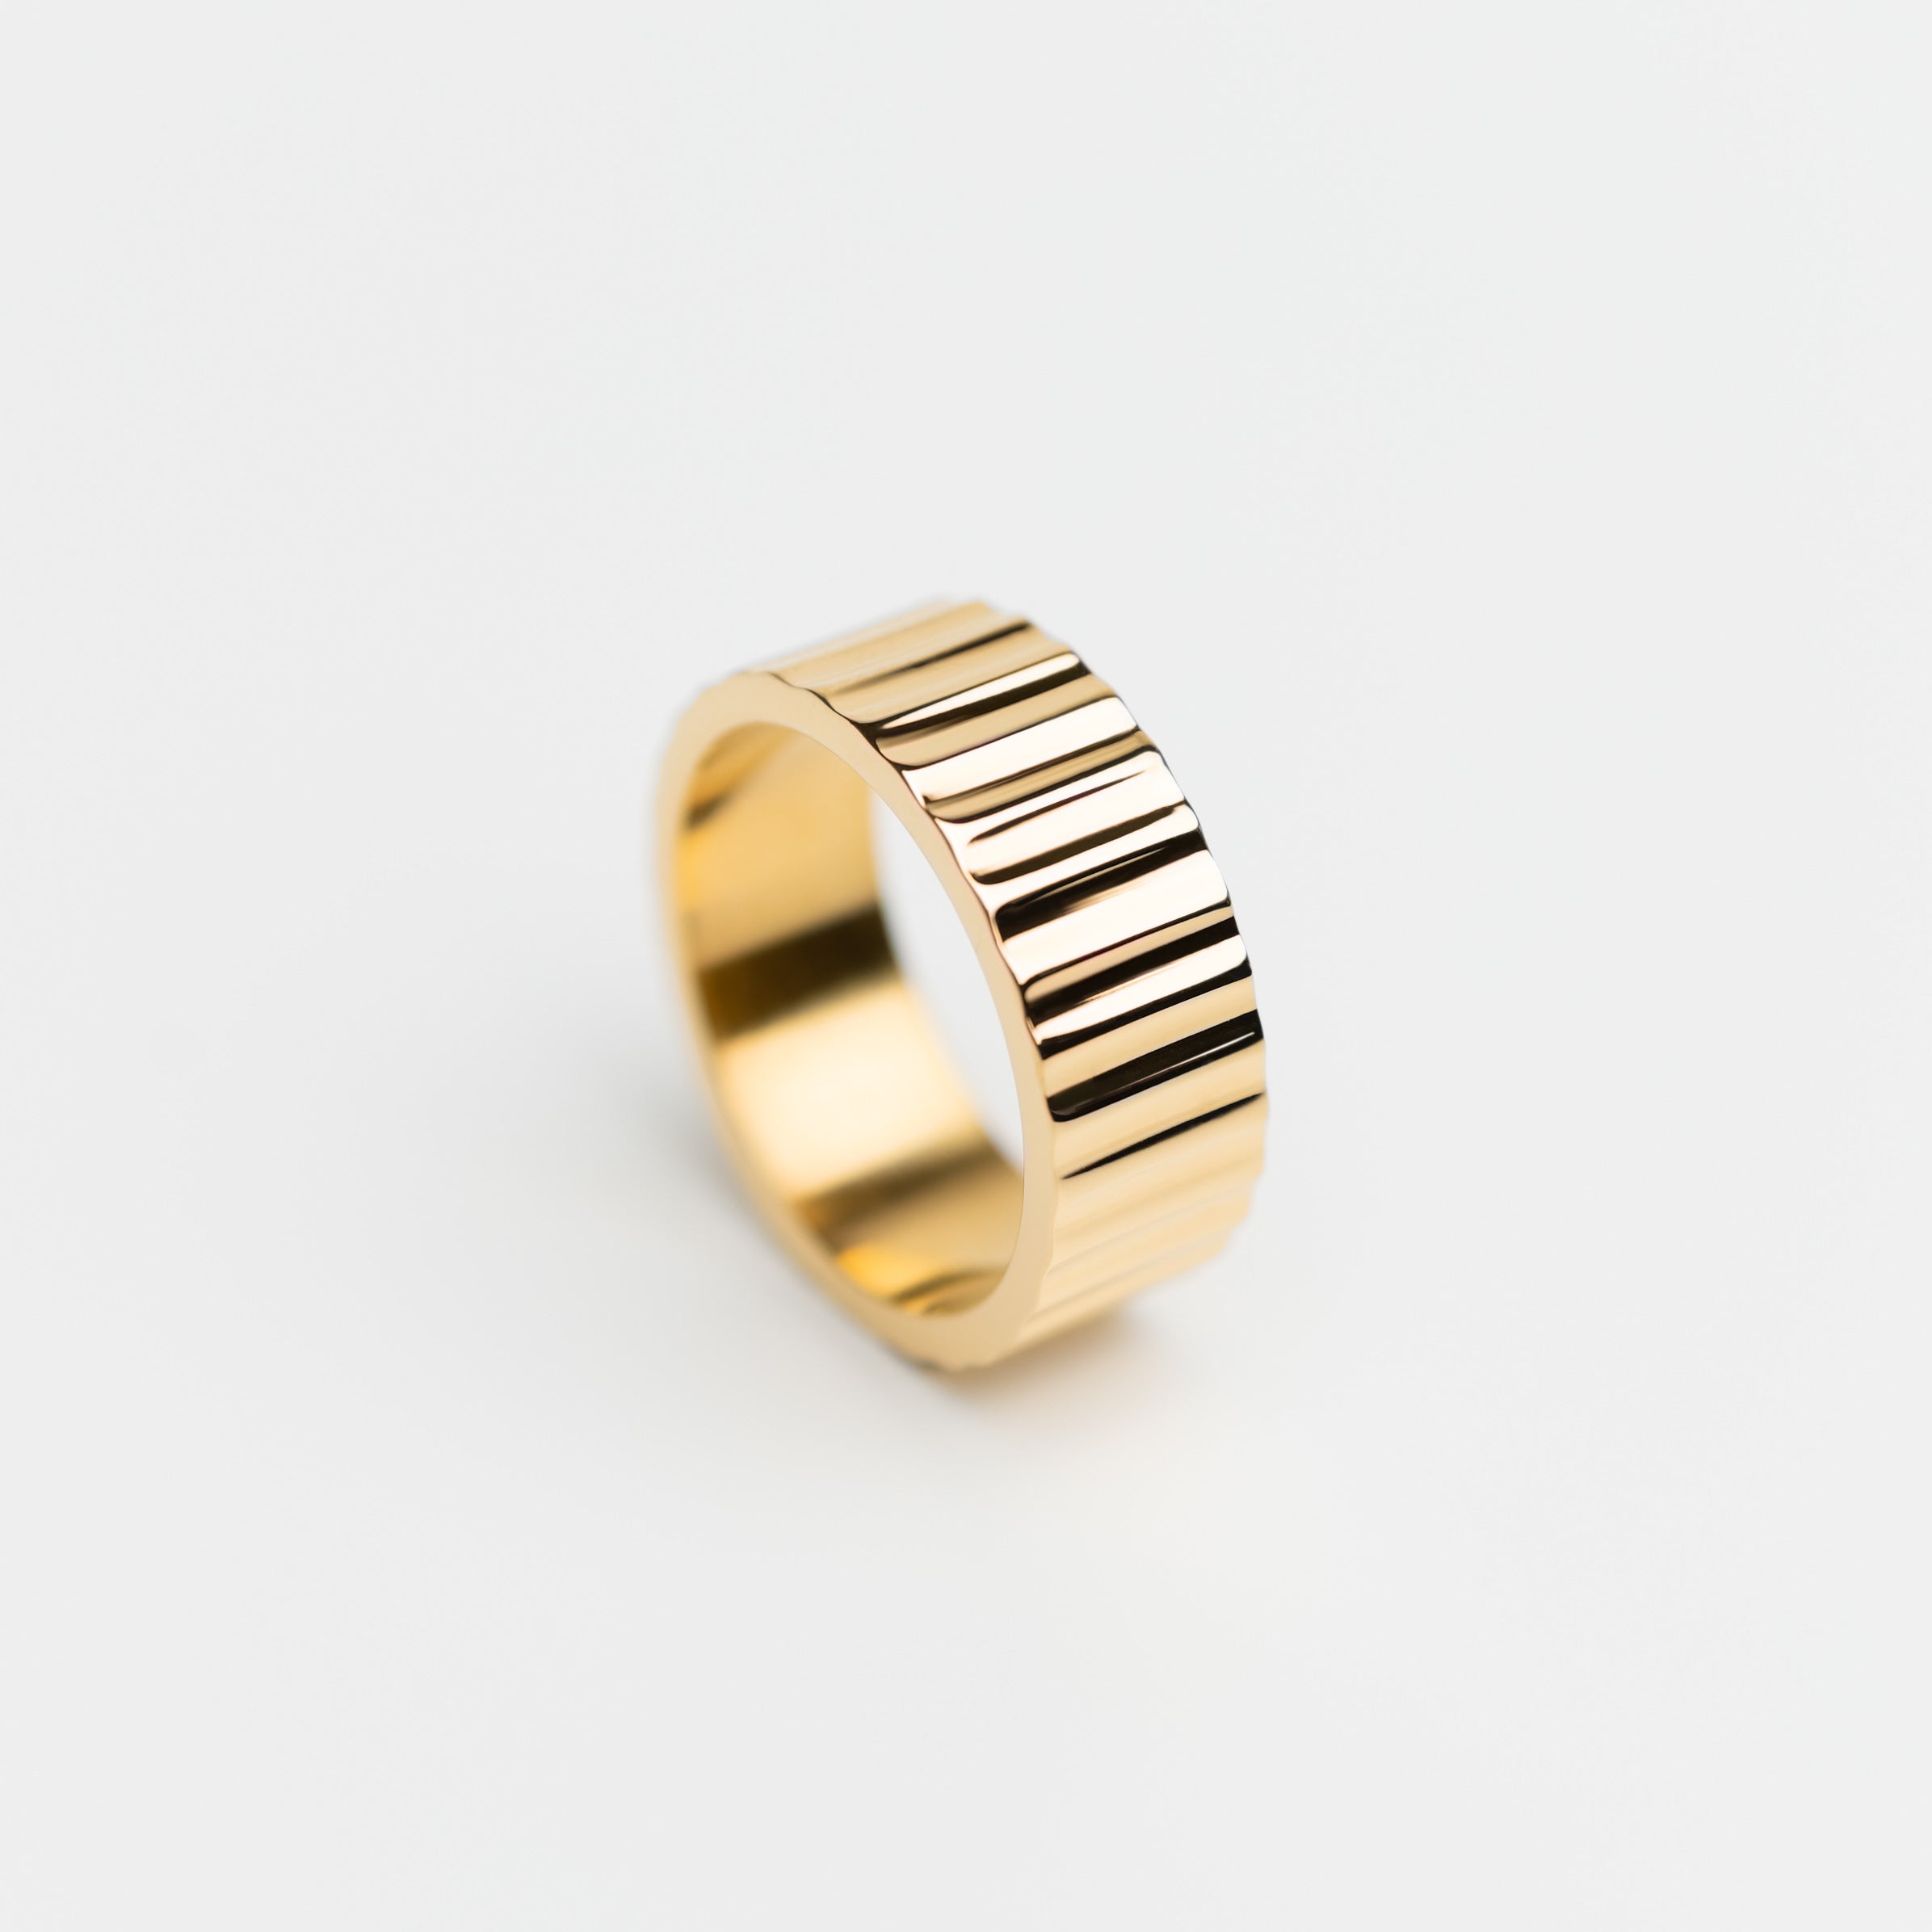 Rº11 - Stainless Steel 18K gold plated ring - Zafeer